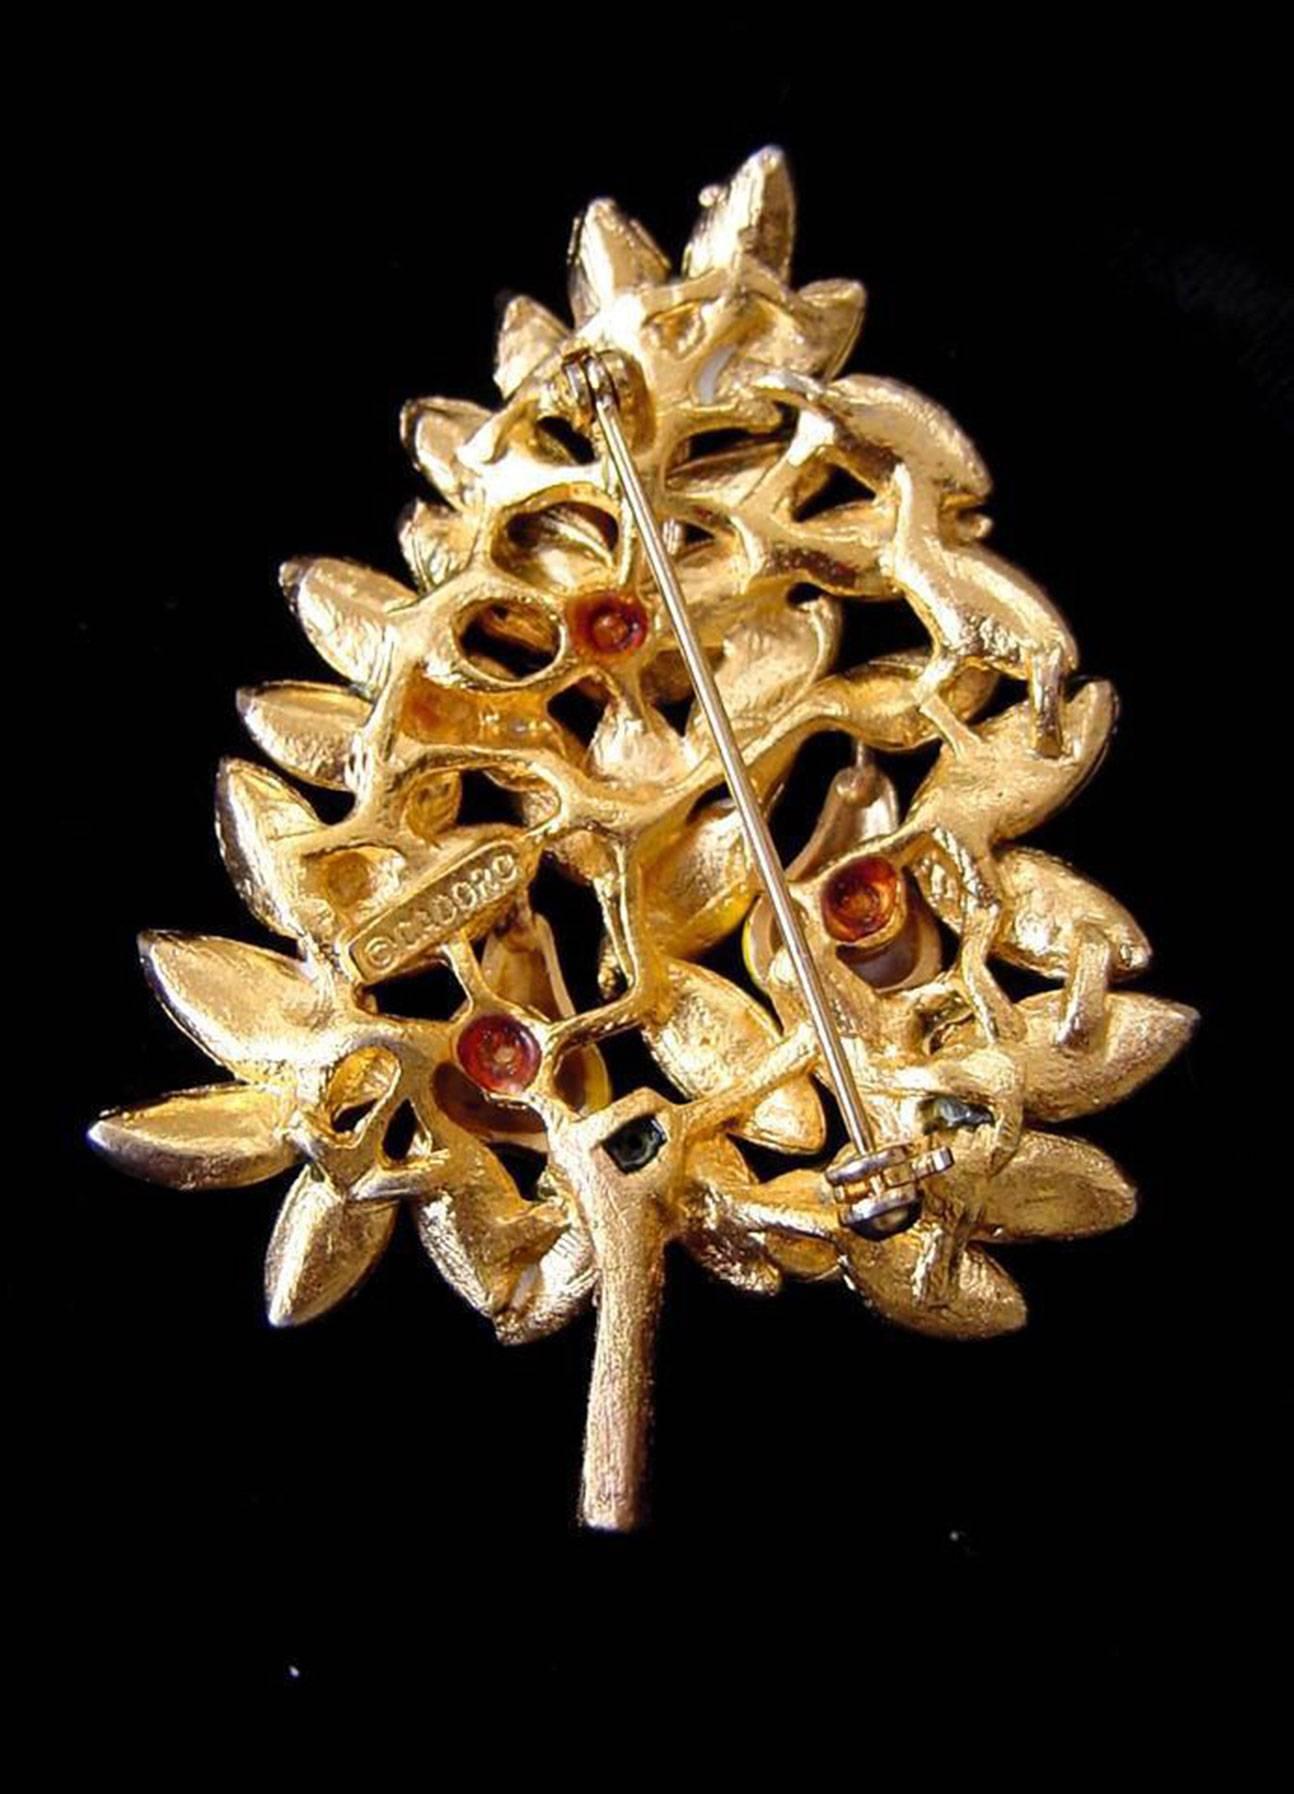 Delightful Christmas pin signed by Cadoro, features a Faux Diamond Partridge in a gold tone tree with enamel green leaves and yellow enamel pears. signed: CADORO. Add your own Chic Festive Style and Pizzazz to any outfit! 
